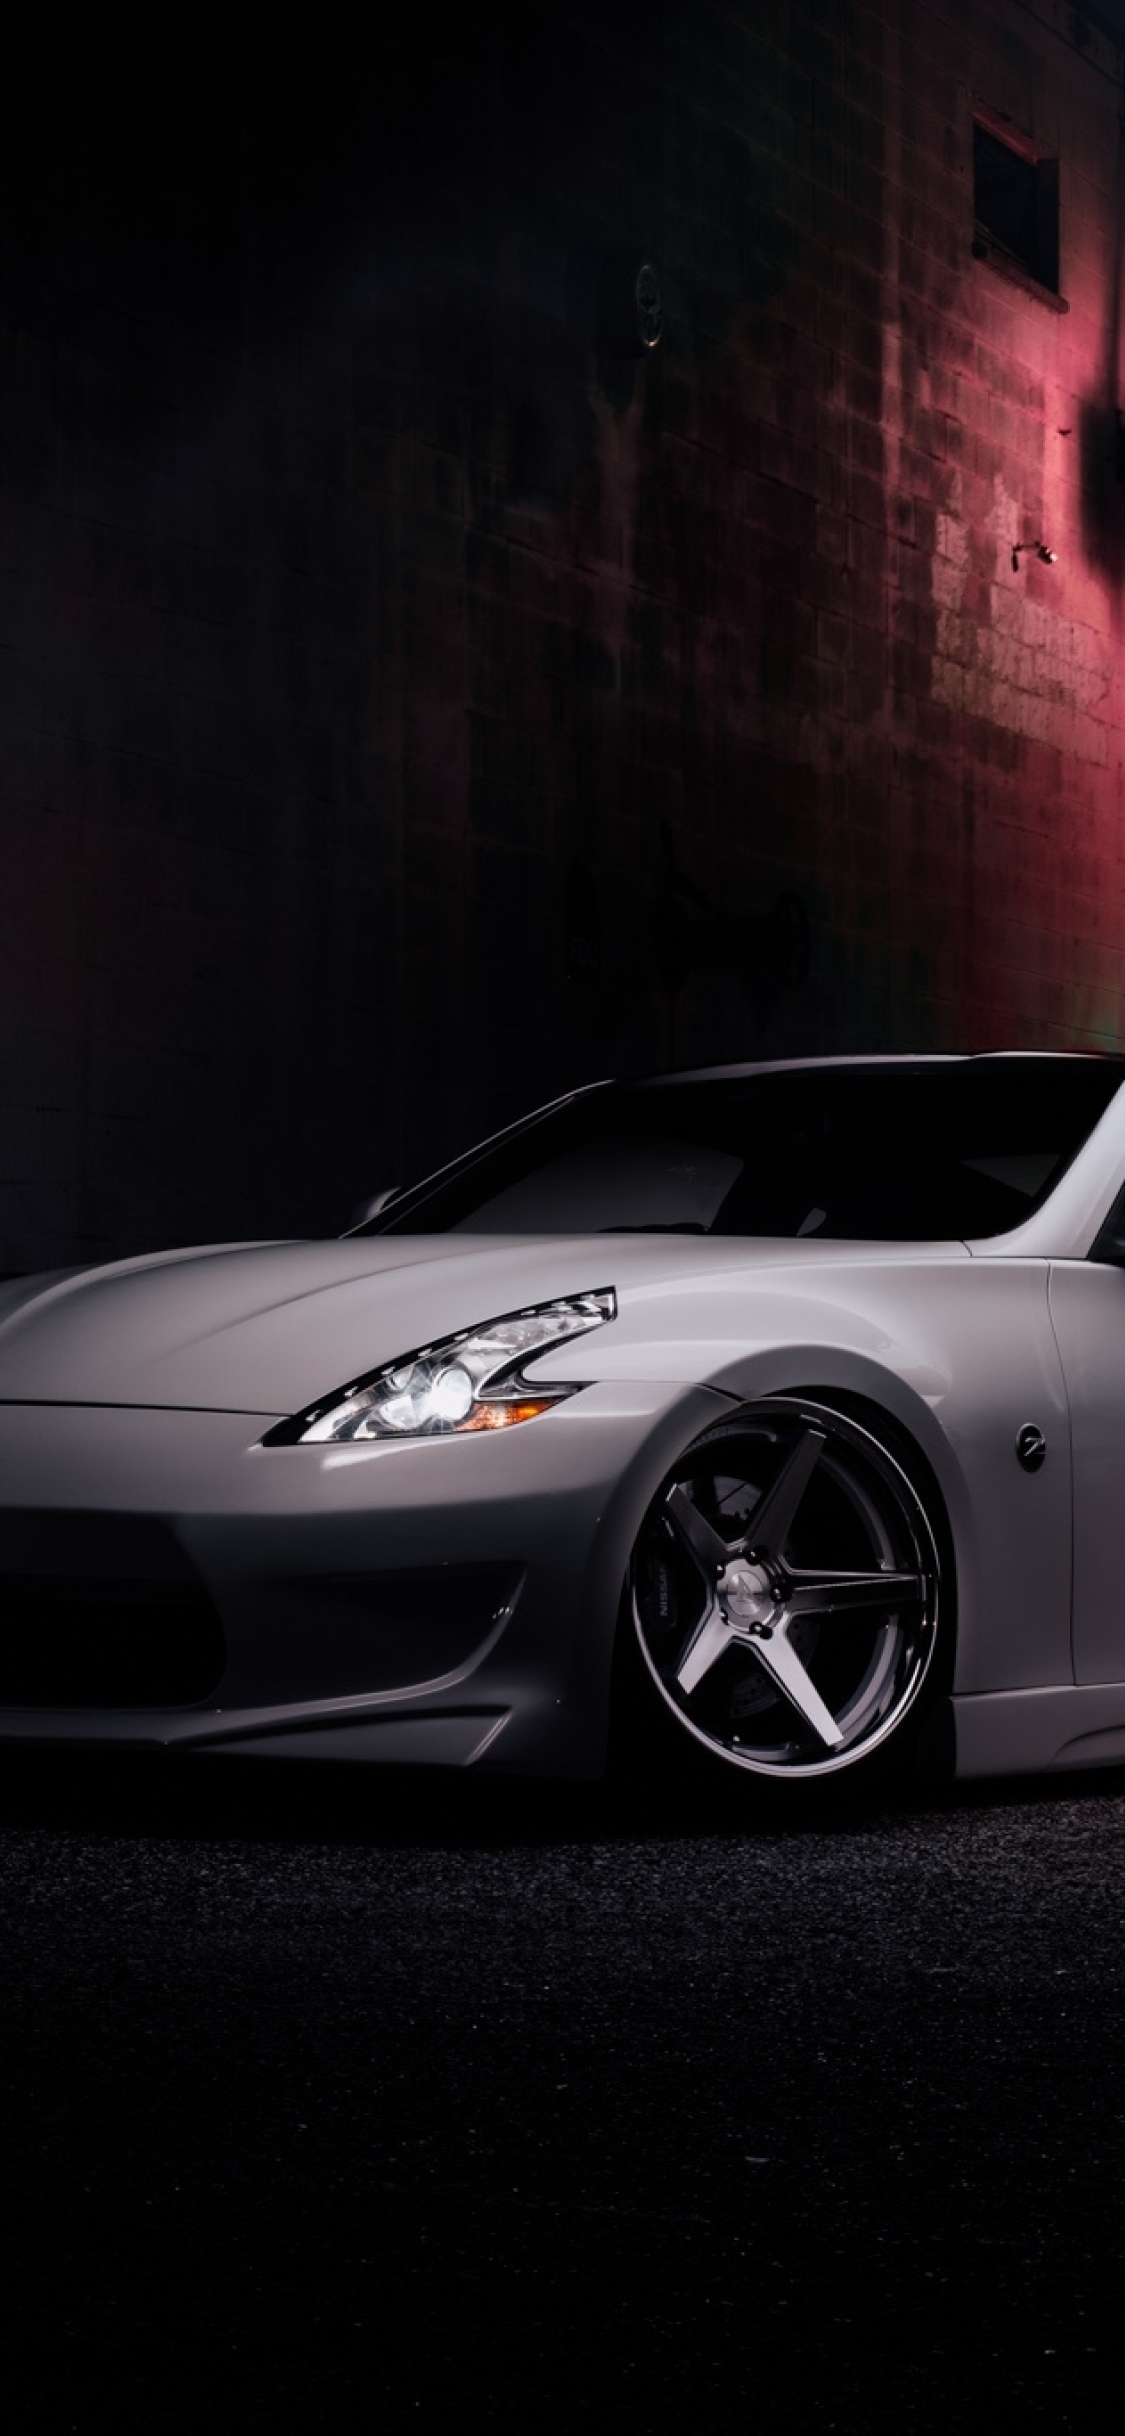 Download wallpaper 1350x2400 nissan 370z jdm side view iphone  876s6 for parallax hd background